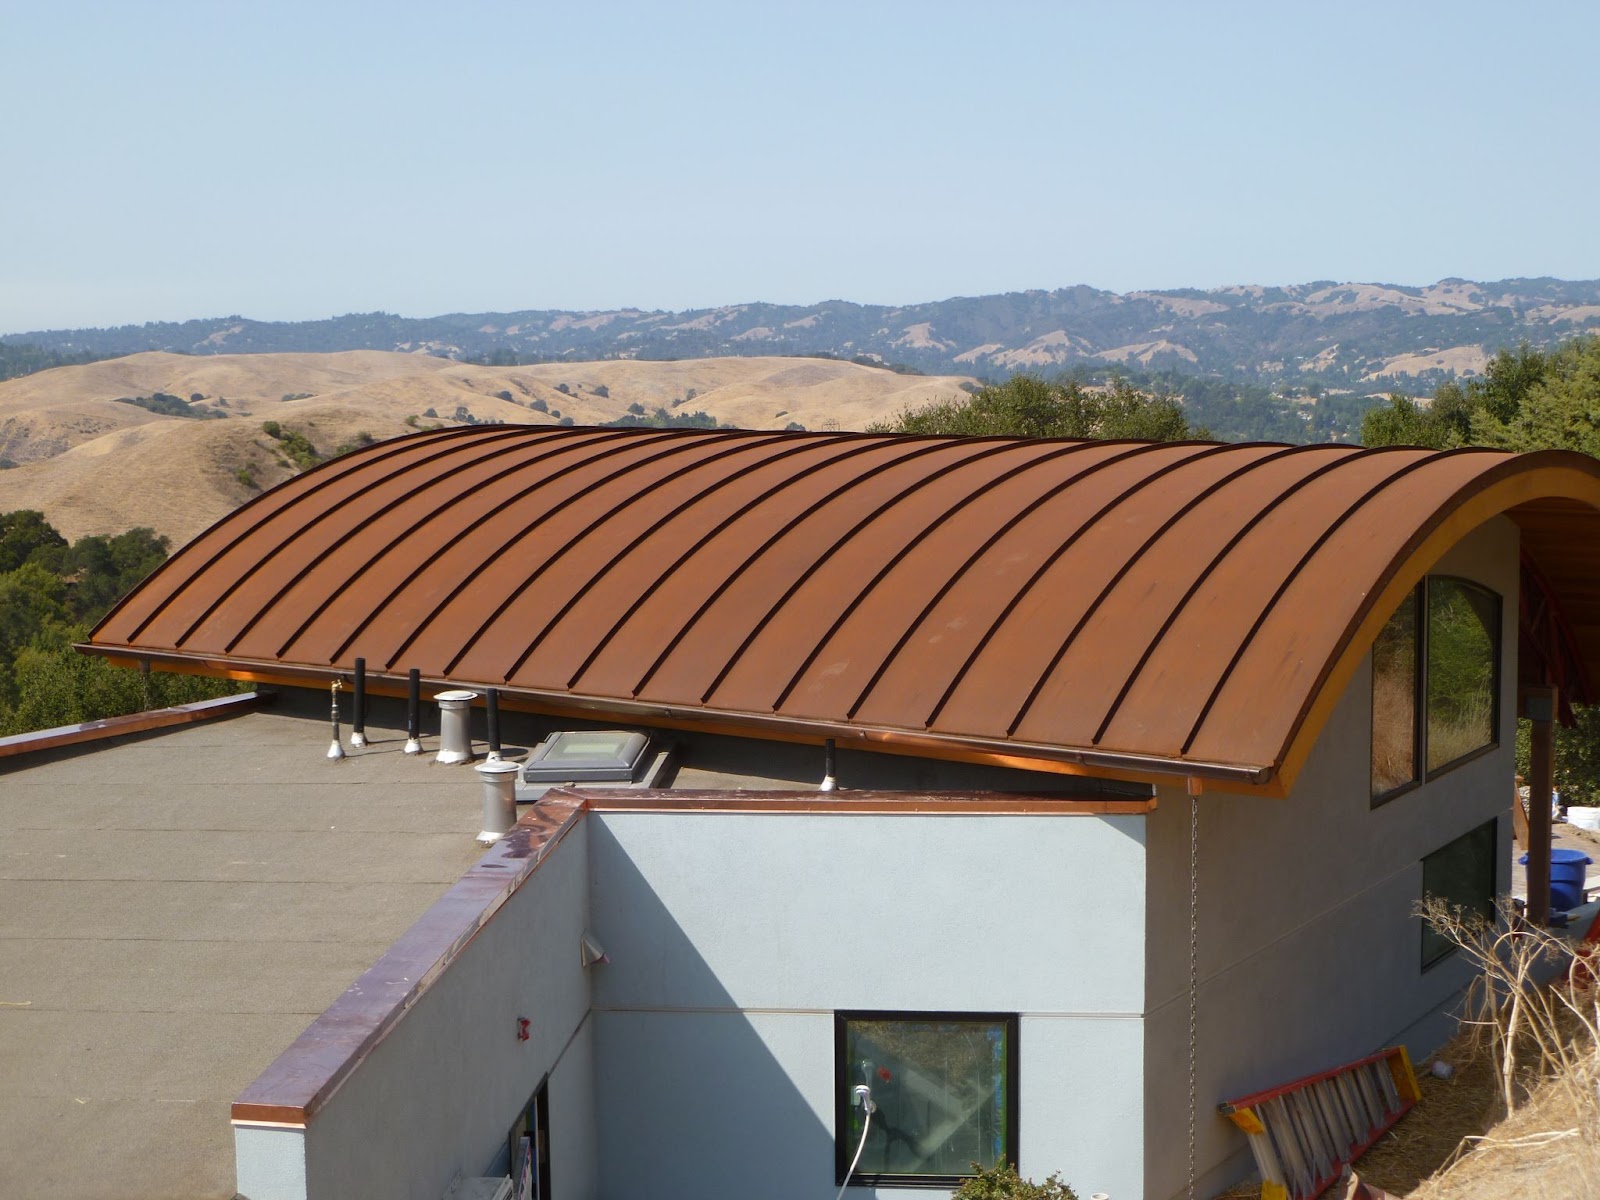 Concave curved standing seam metal roof in a Corten® finish